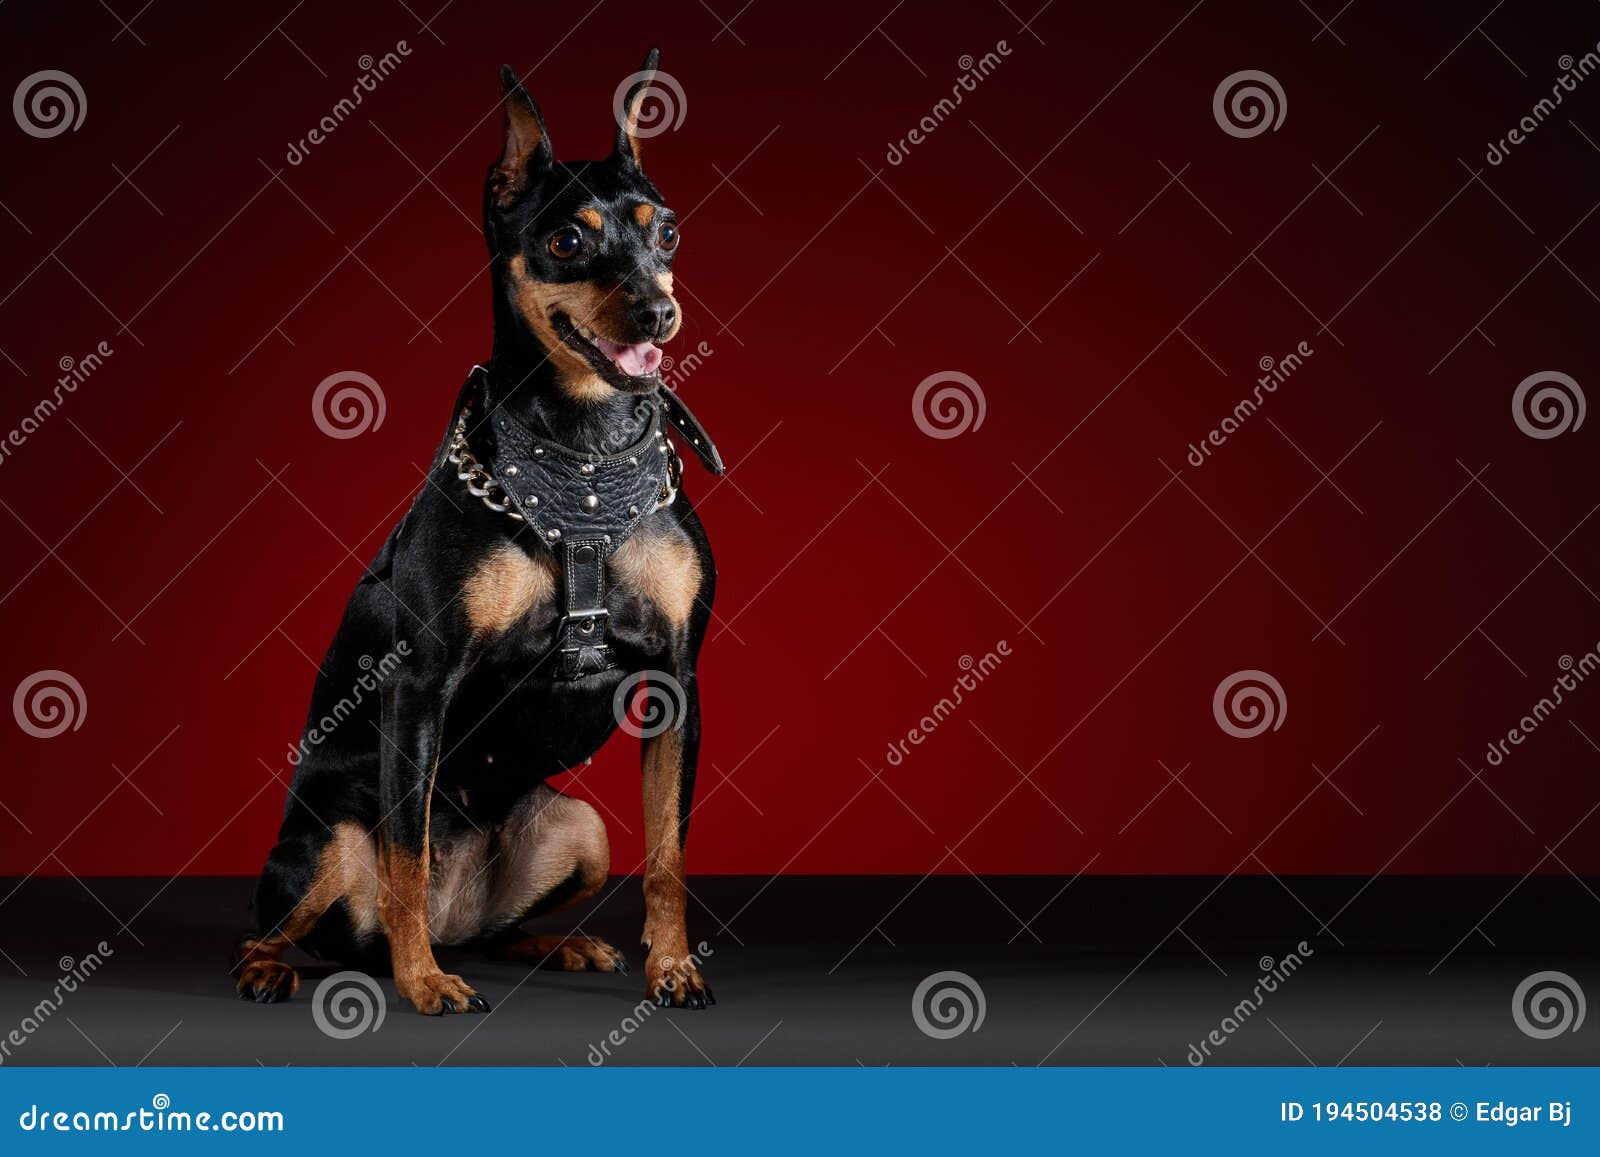 doberman dog with tongue sticking out sitting